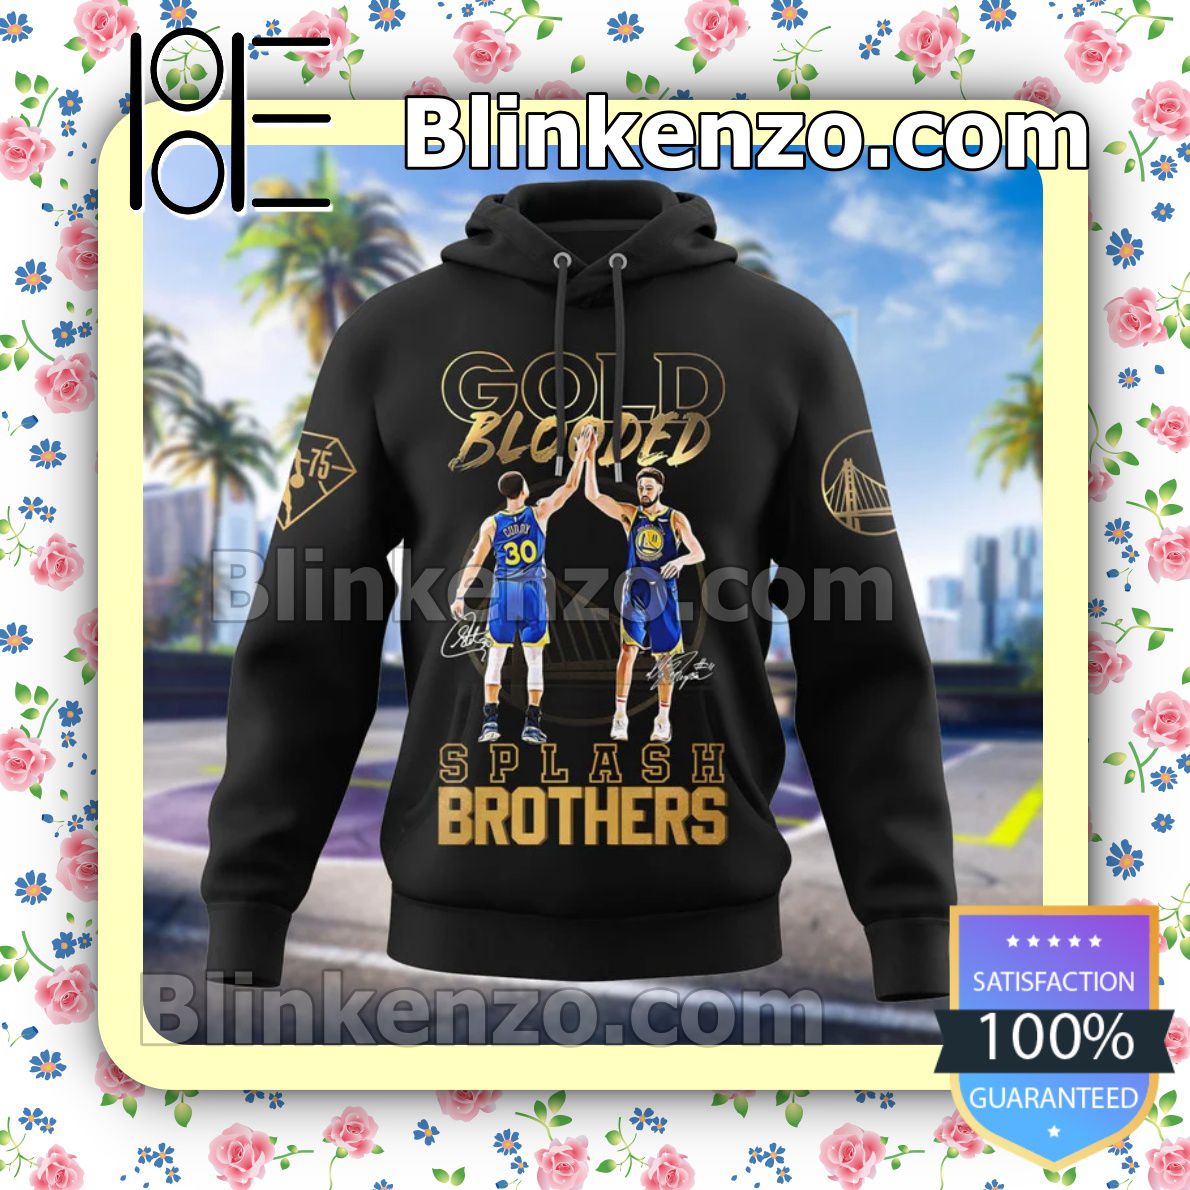 Discount Gold Blooded Splash Brother Stephen Curry And Klay Thompson Signatures Hoodies, Long Sleeve Shirt